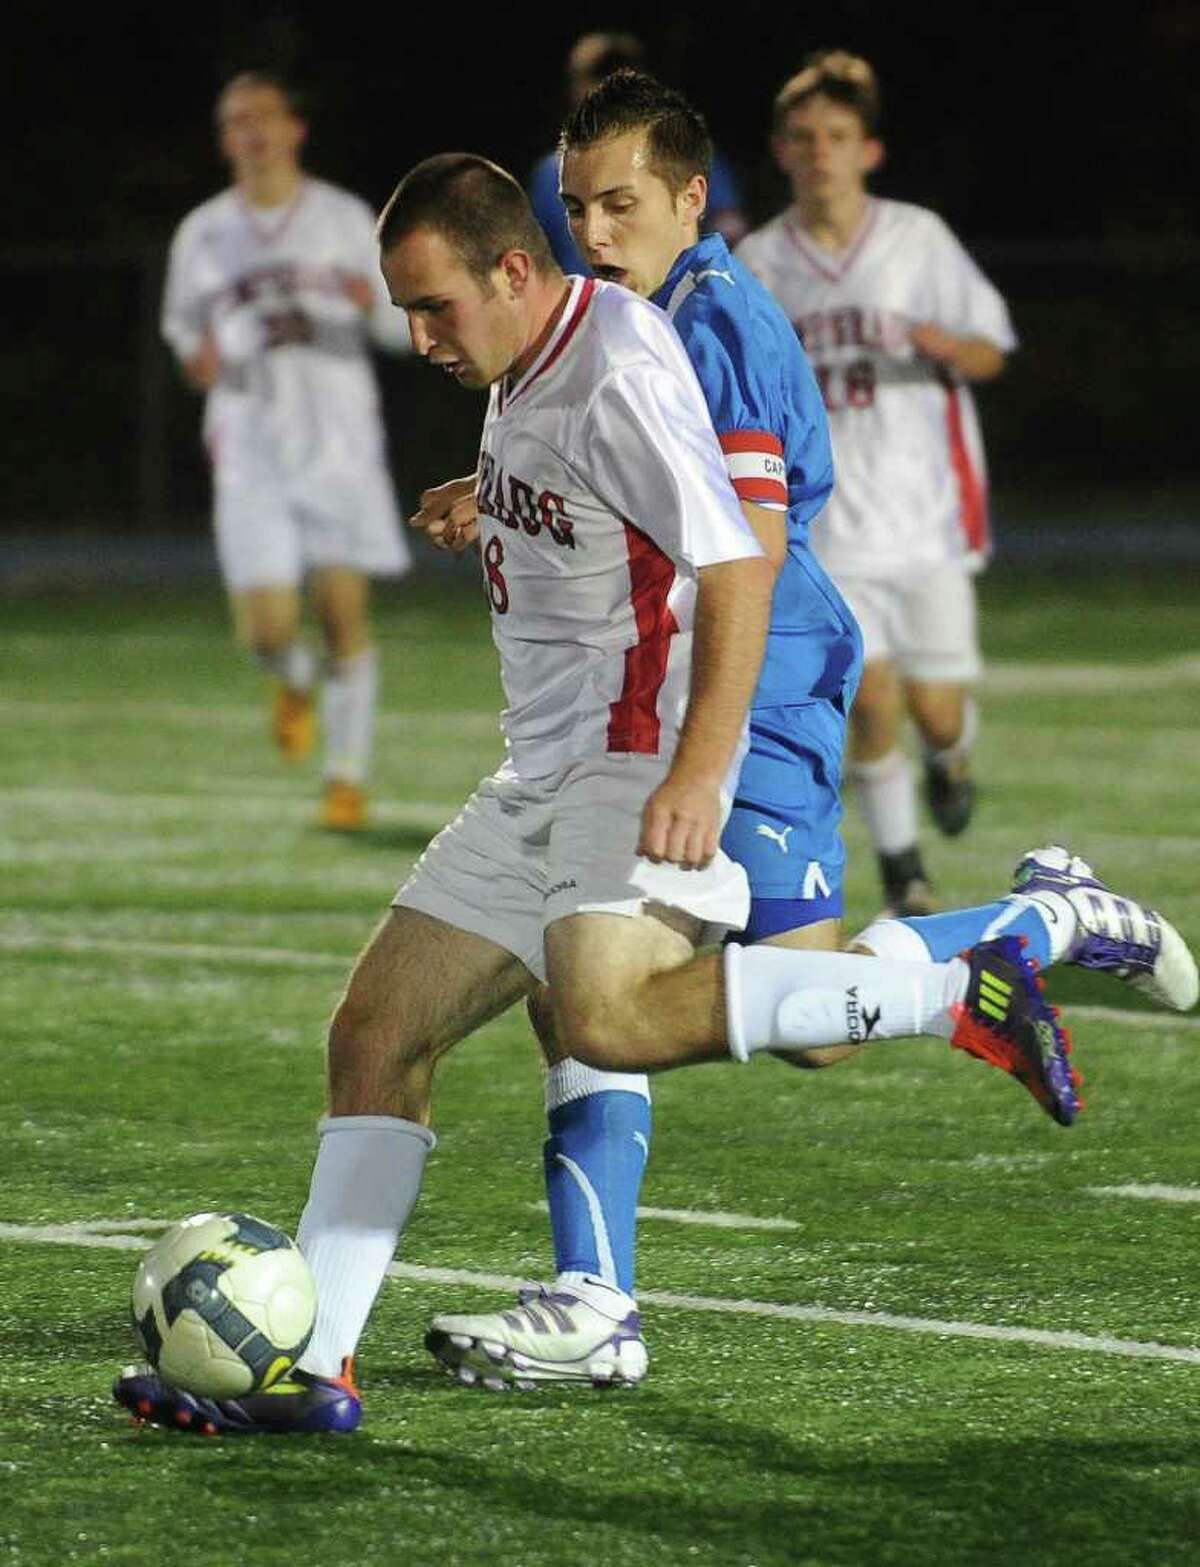 Bunnell vs. Pomperaug in the SWC Championship game at Bunnell High School in Stratford on Monday, November 7, 2011.